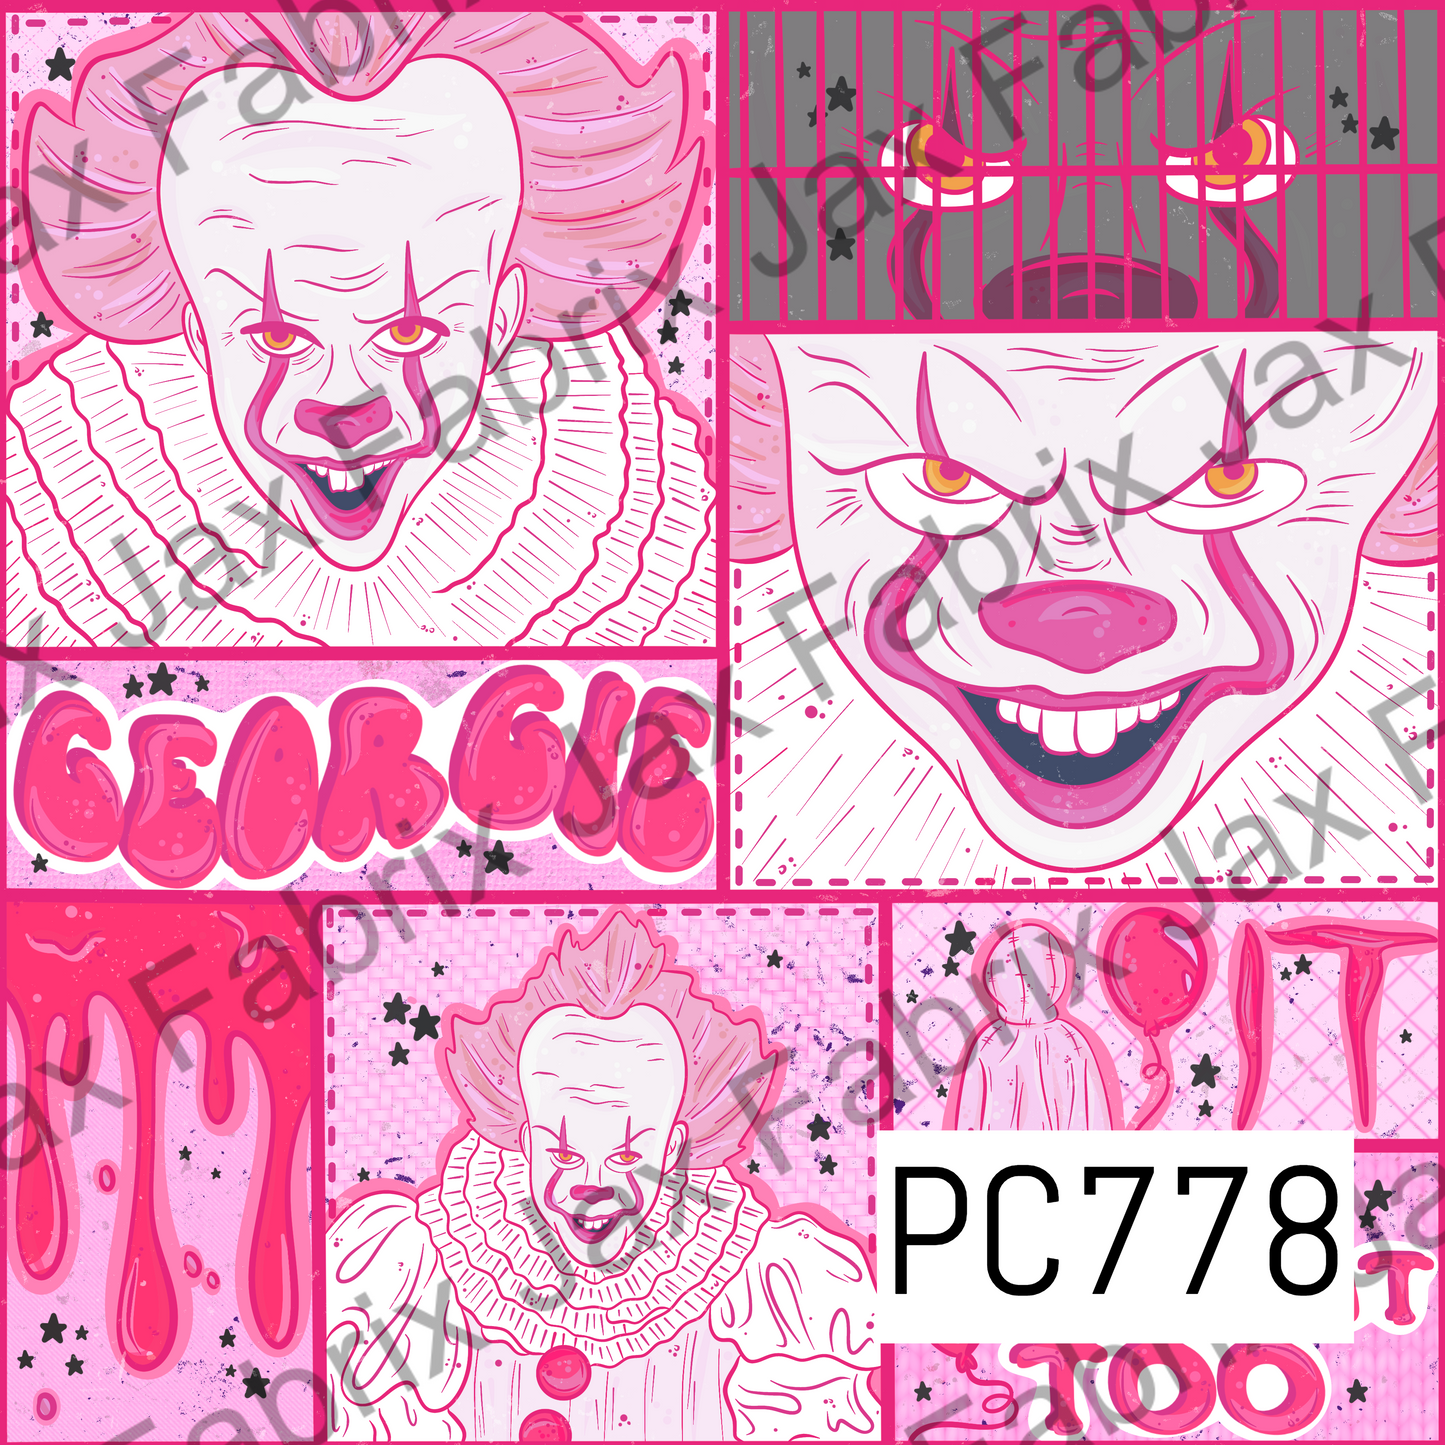 Clown Scare Mask Pink PC778